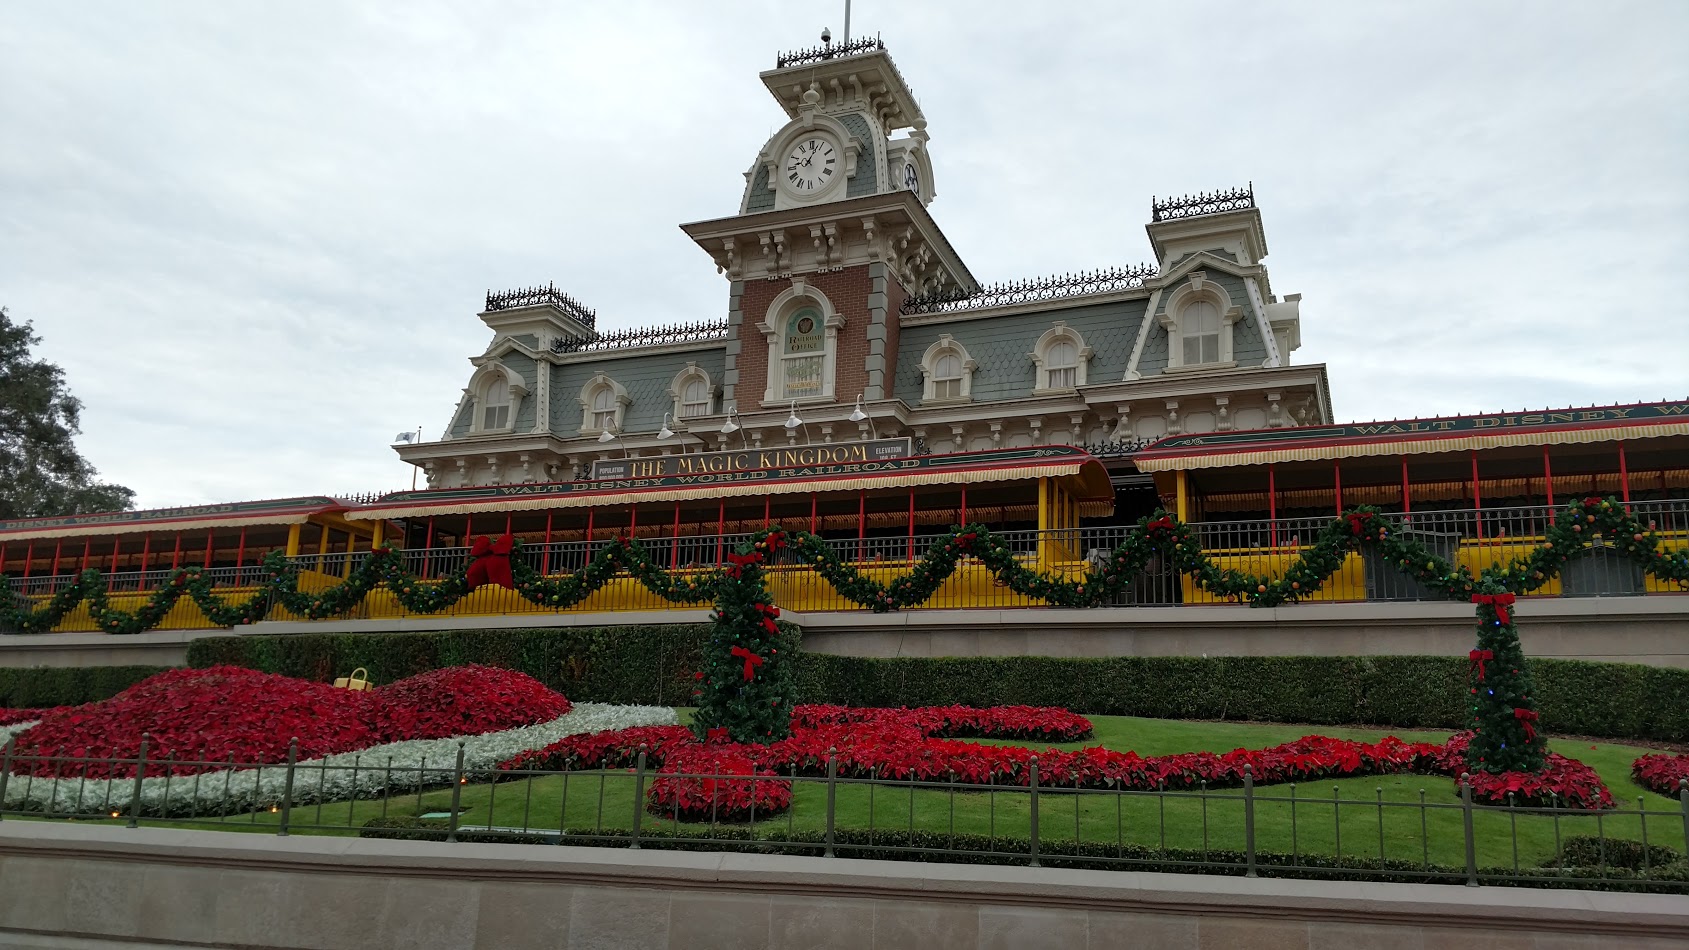 How long is Disney keeping their Christmas Decorations up for?